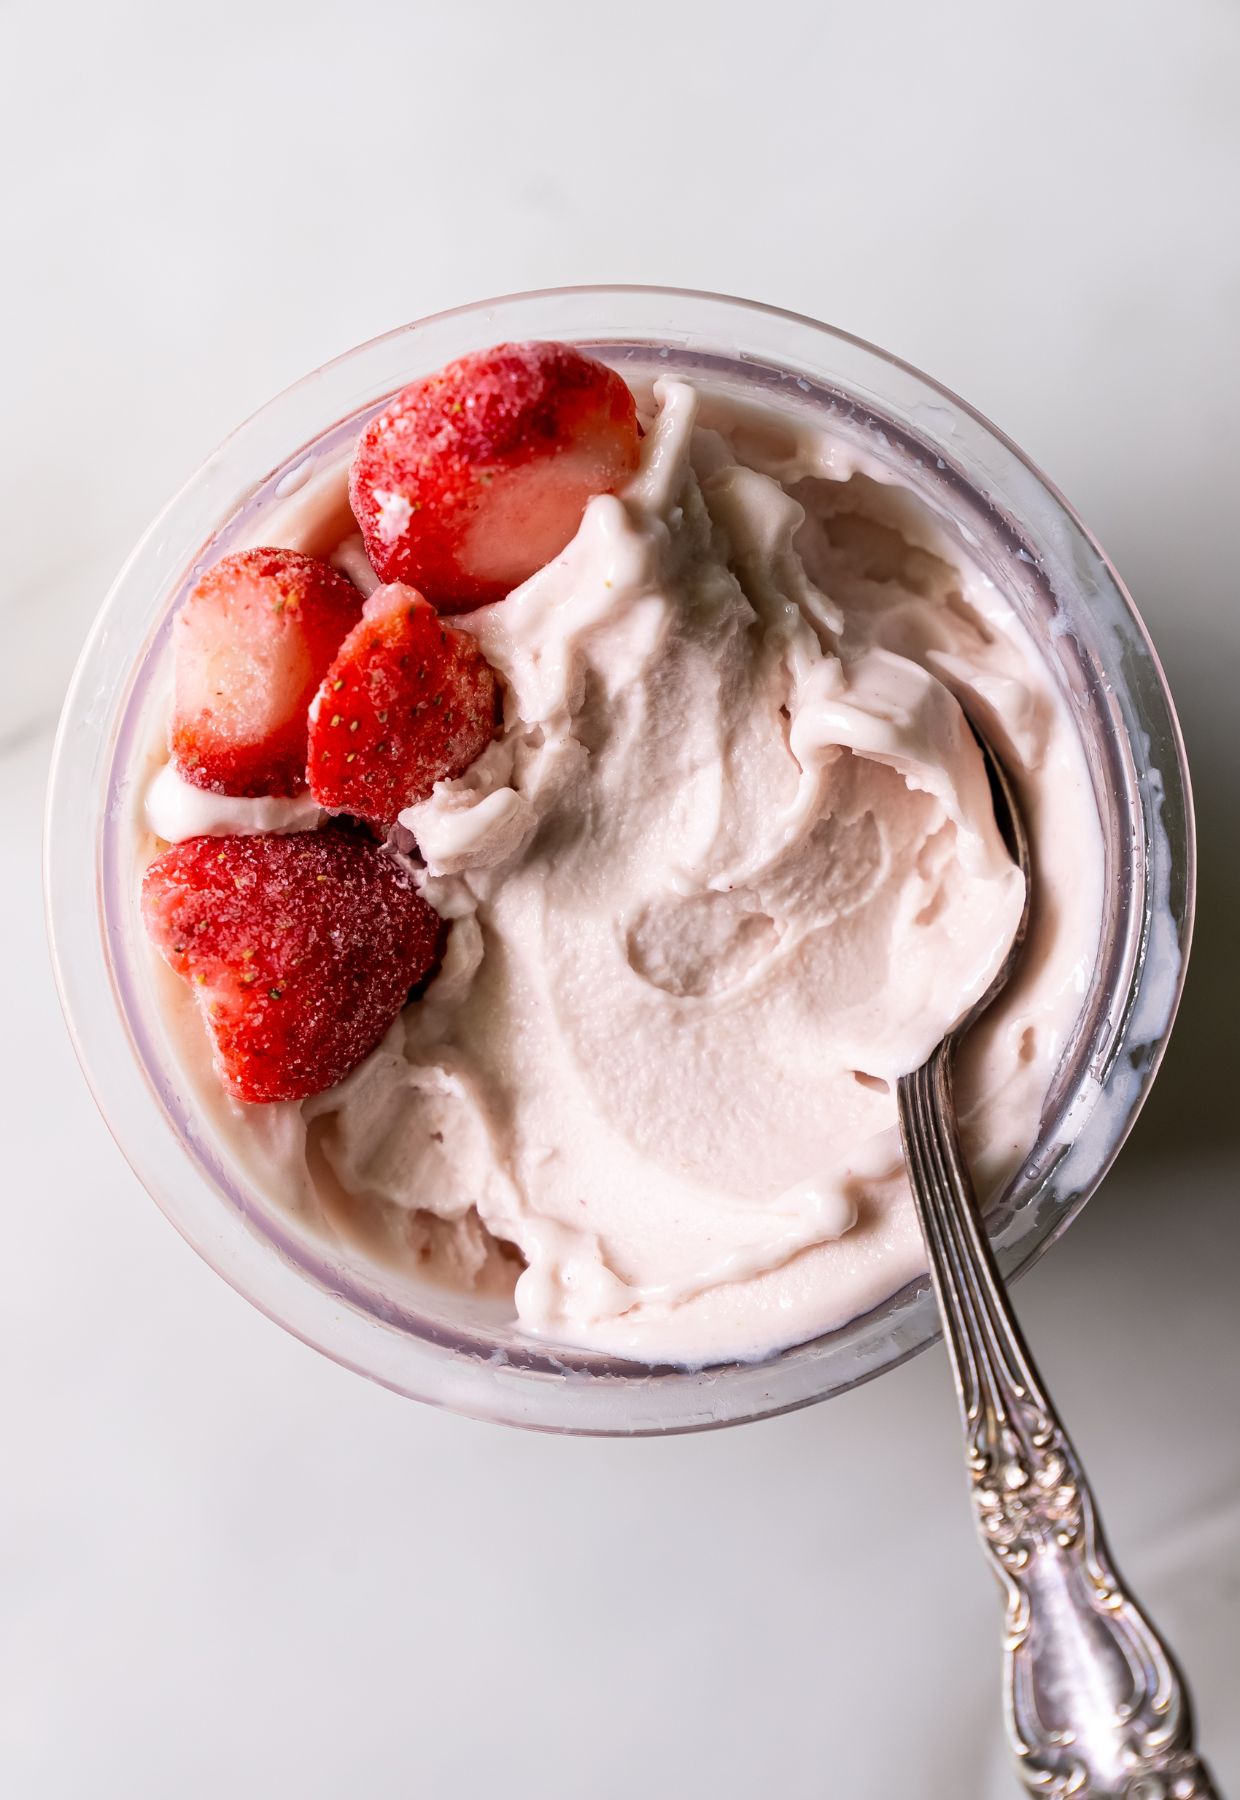 A glass container filled with whipped cream topped with sliced strawberries. A silver spoon is placed inside the container.